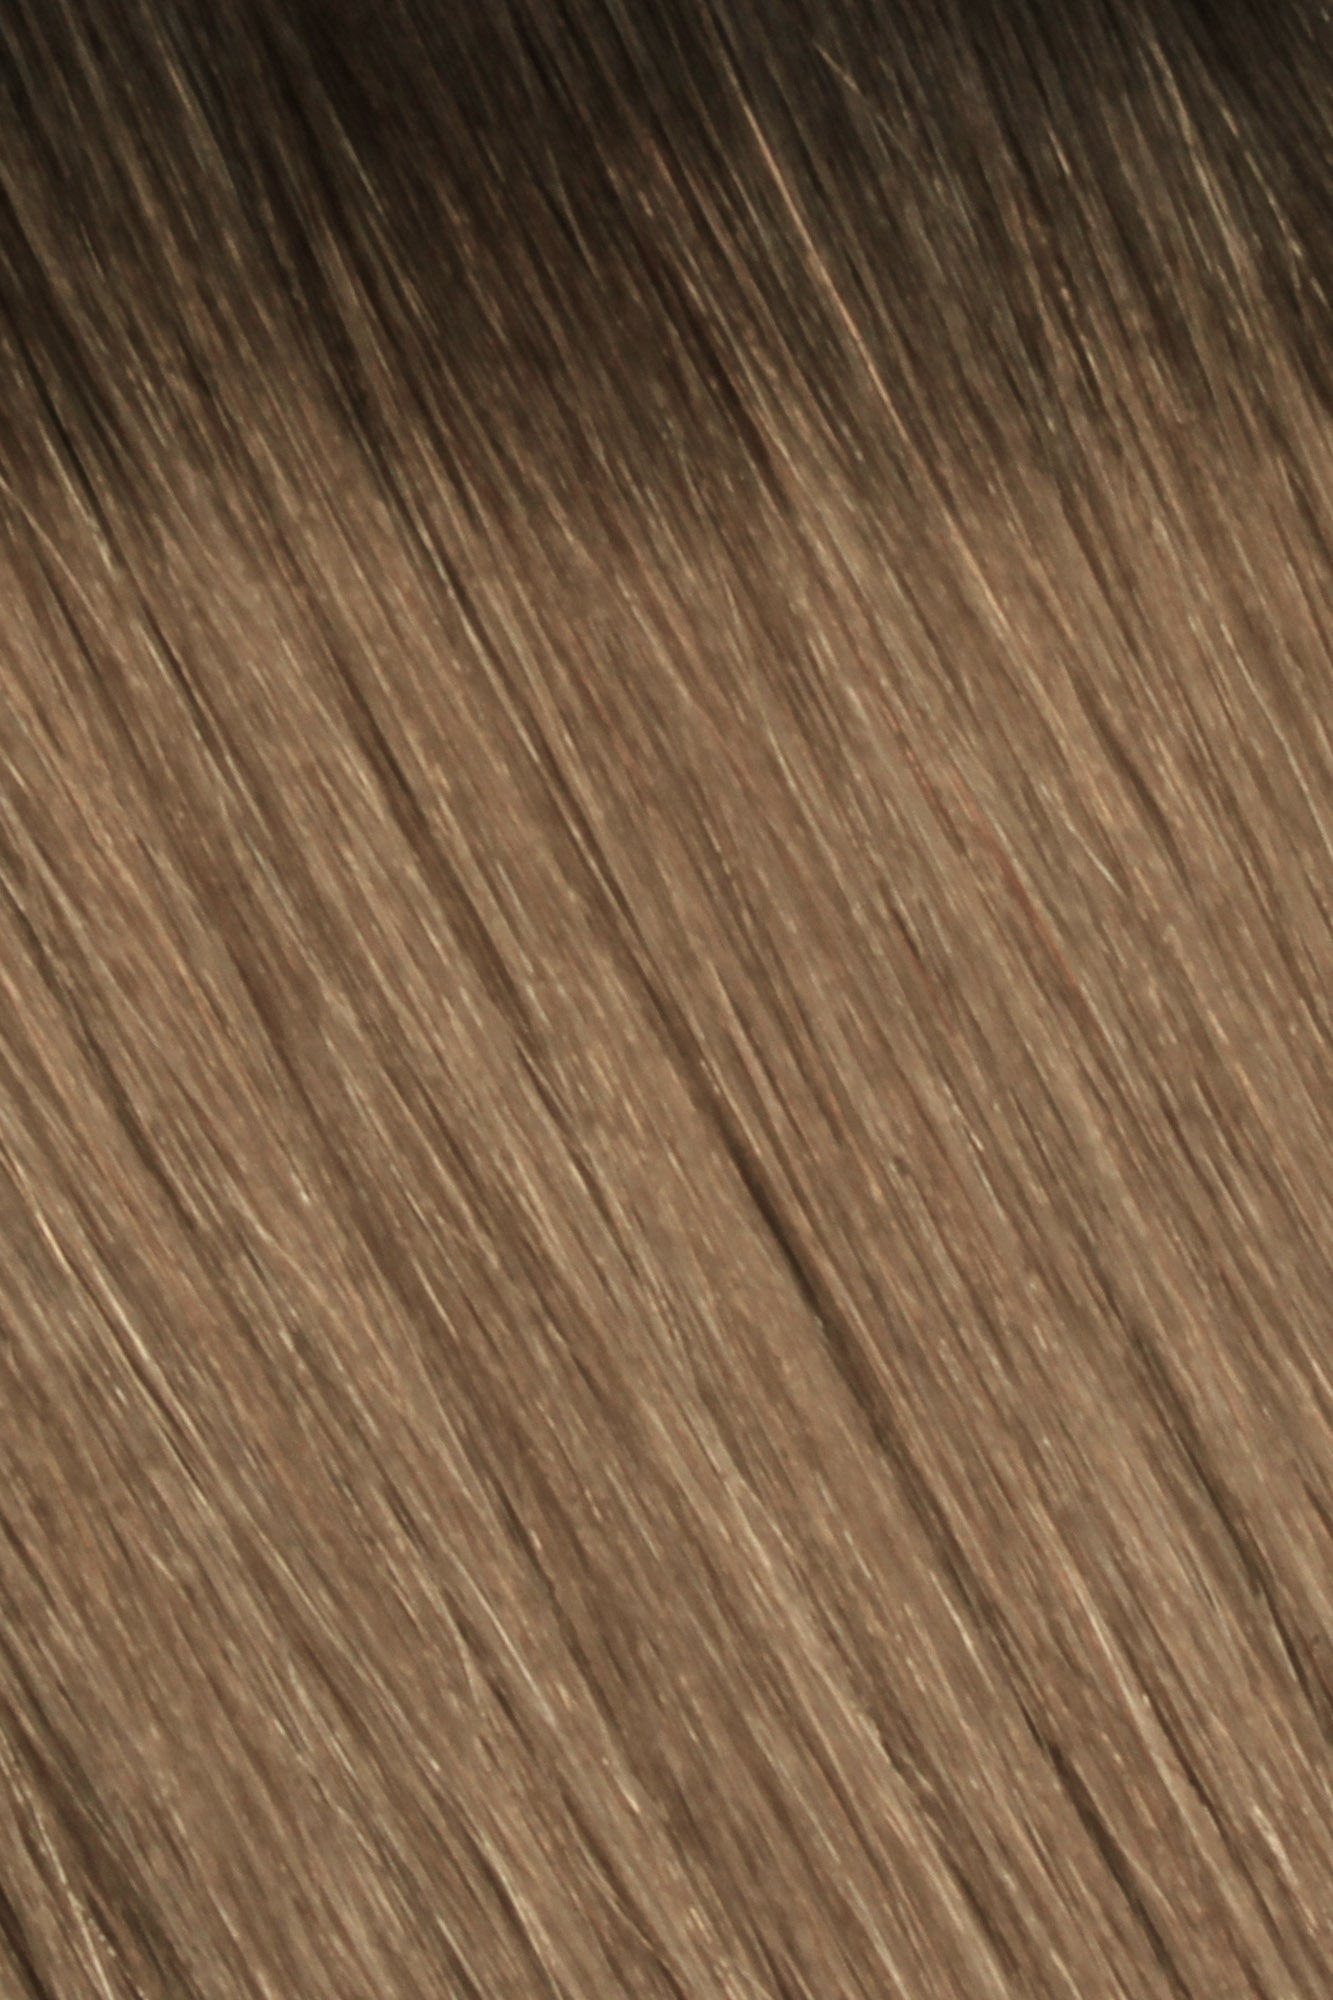 SEAMLESS® Flat Weft 22 Inches - SWAY Hair Extensions Rooted-Sunkissed-Brown-R2-8-10 Natural SEAMLESS® Flat Weft 22 Inches extensions. Thin, flexible, and discreet. 100% Double Drawn Remy Human Hair. Versatile and reusable